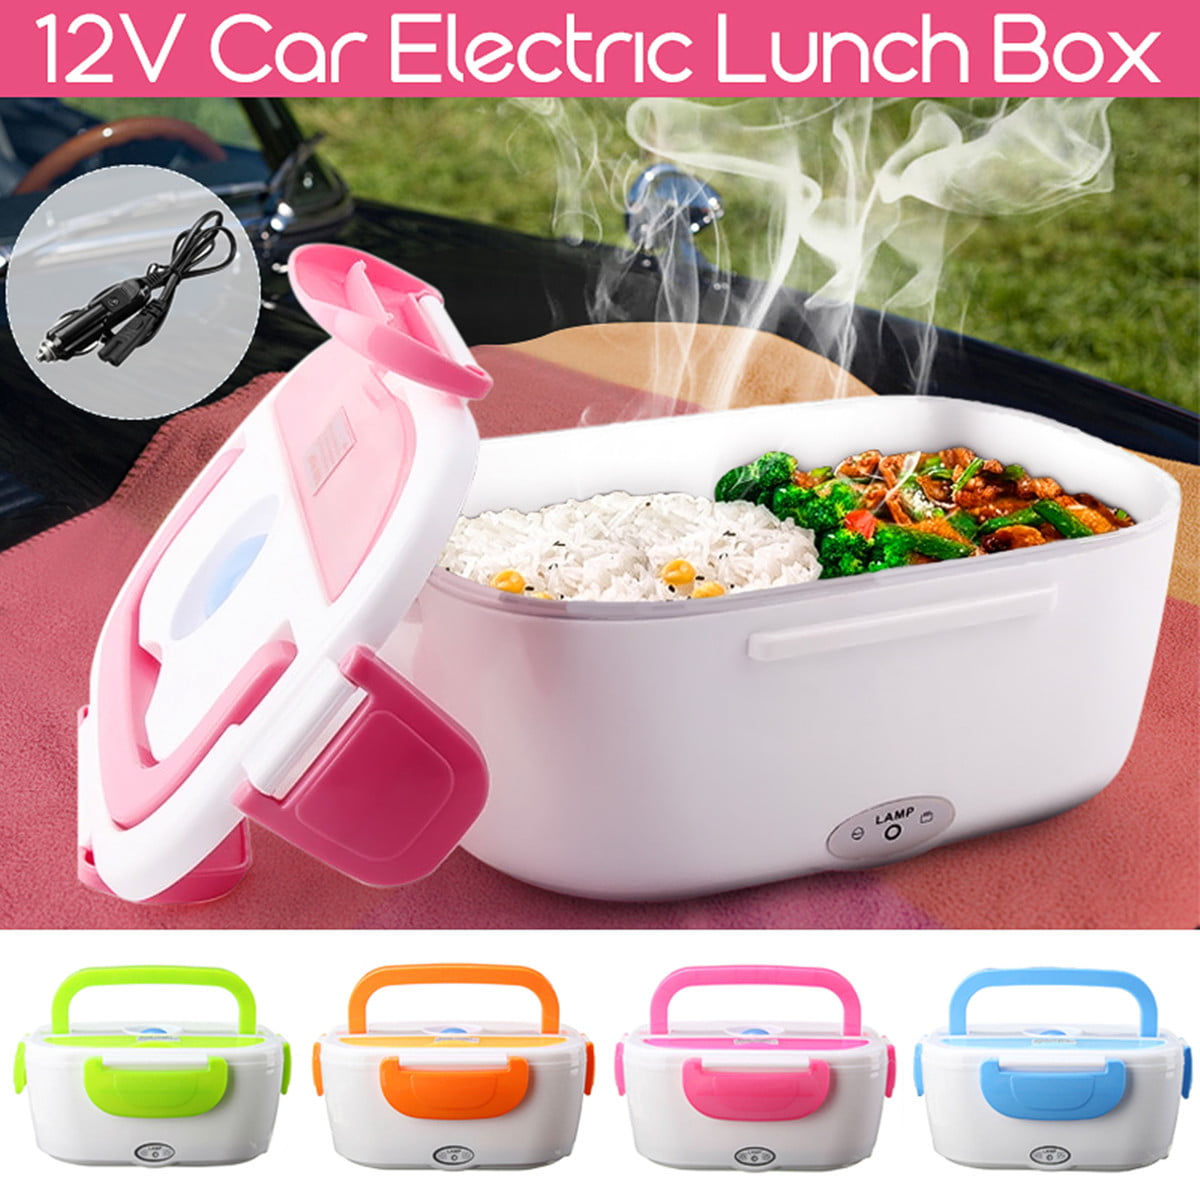 1.05L Portable Car 12V Electric Heated Lunch Box Heating Food Warmer Container 